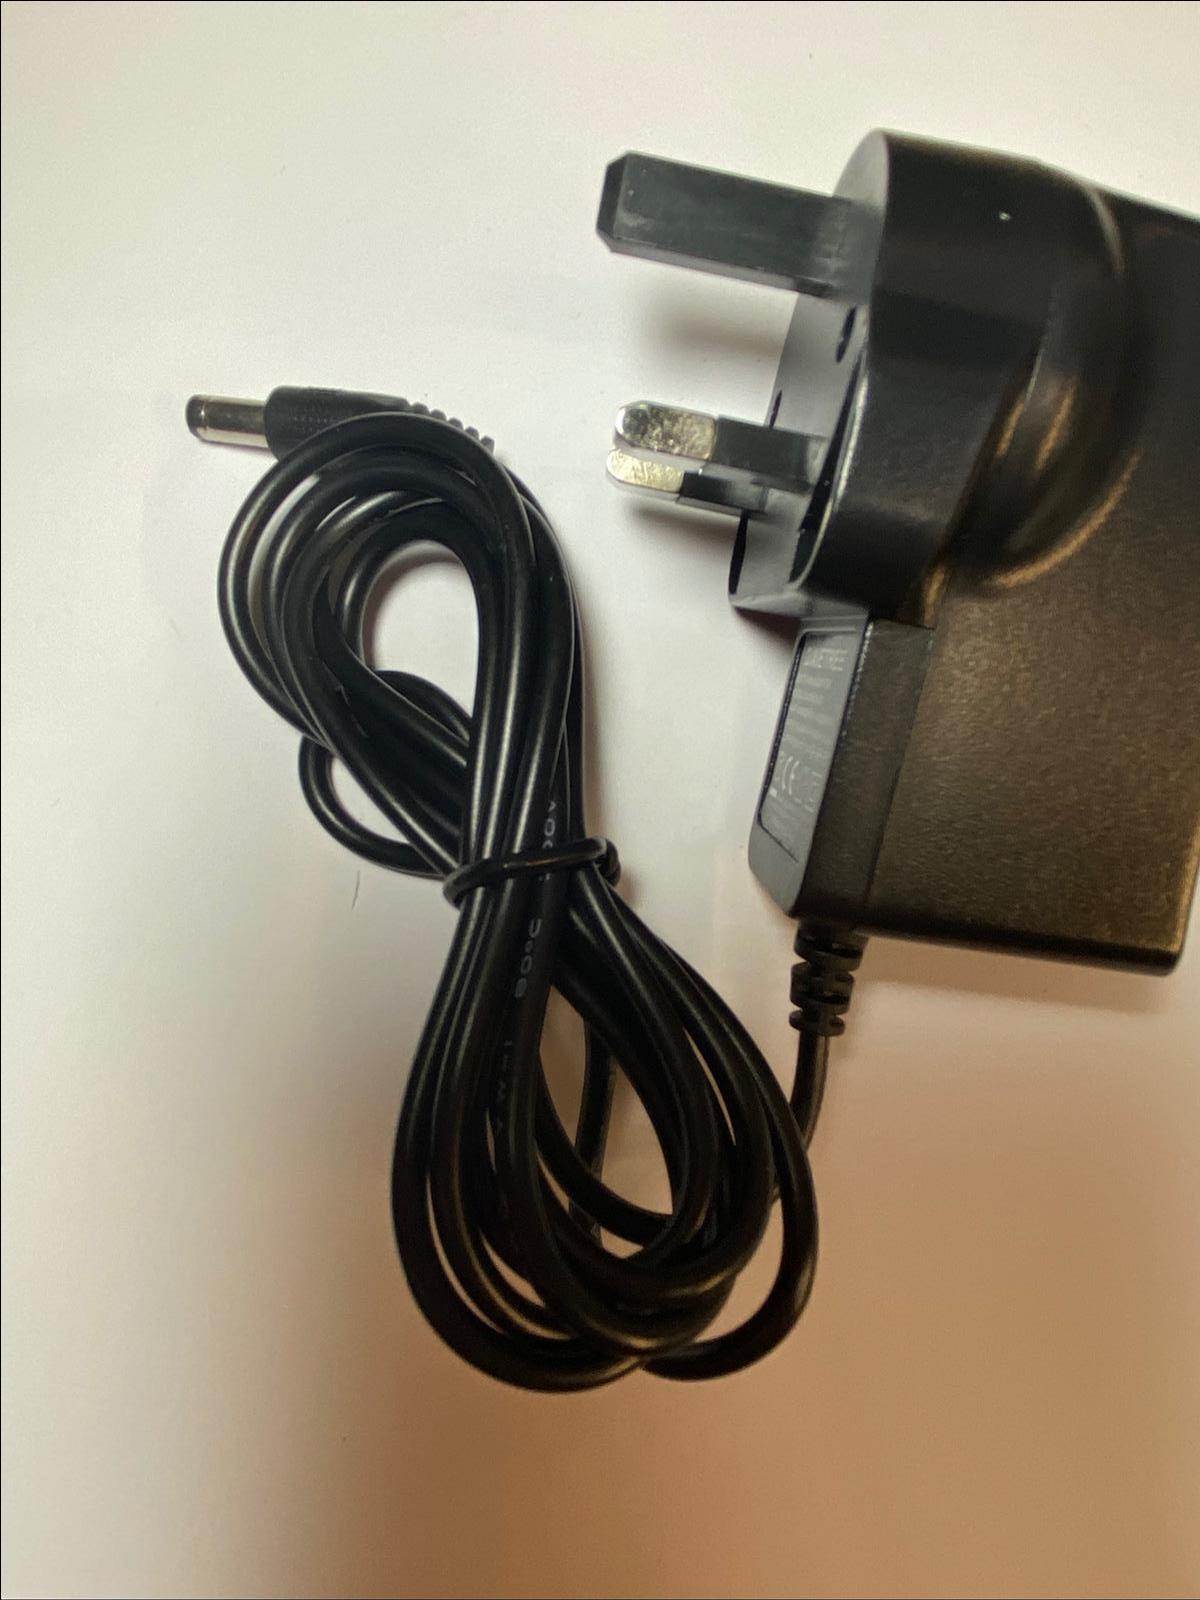 9V Switching Adapter for Brother P-Touch 1005, 1010, 1080, 1090 Label Printer Type: Power Adapter Max. Output Power: